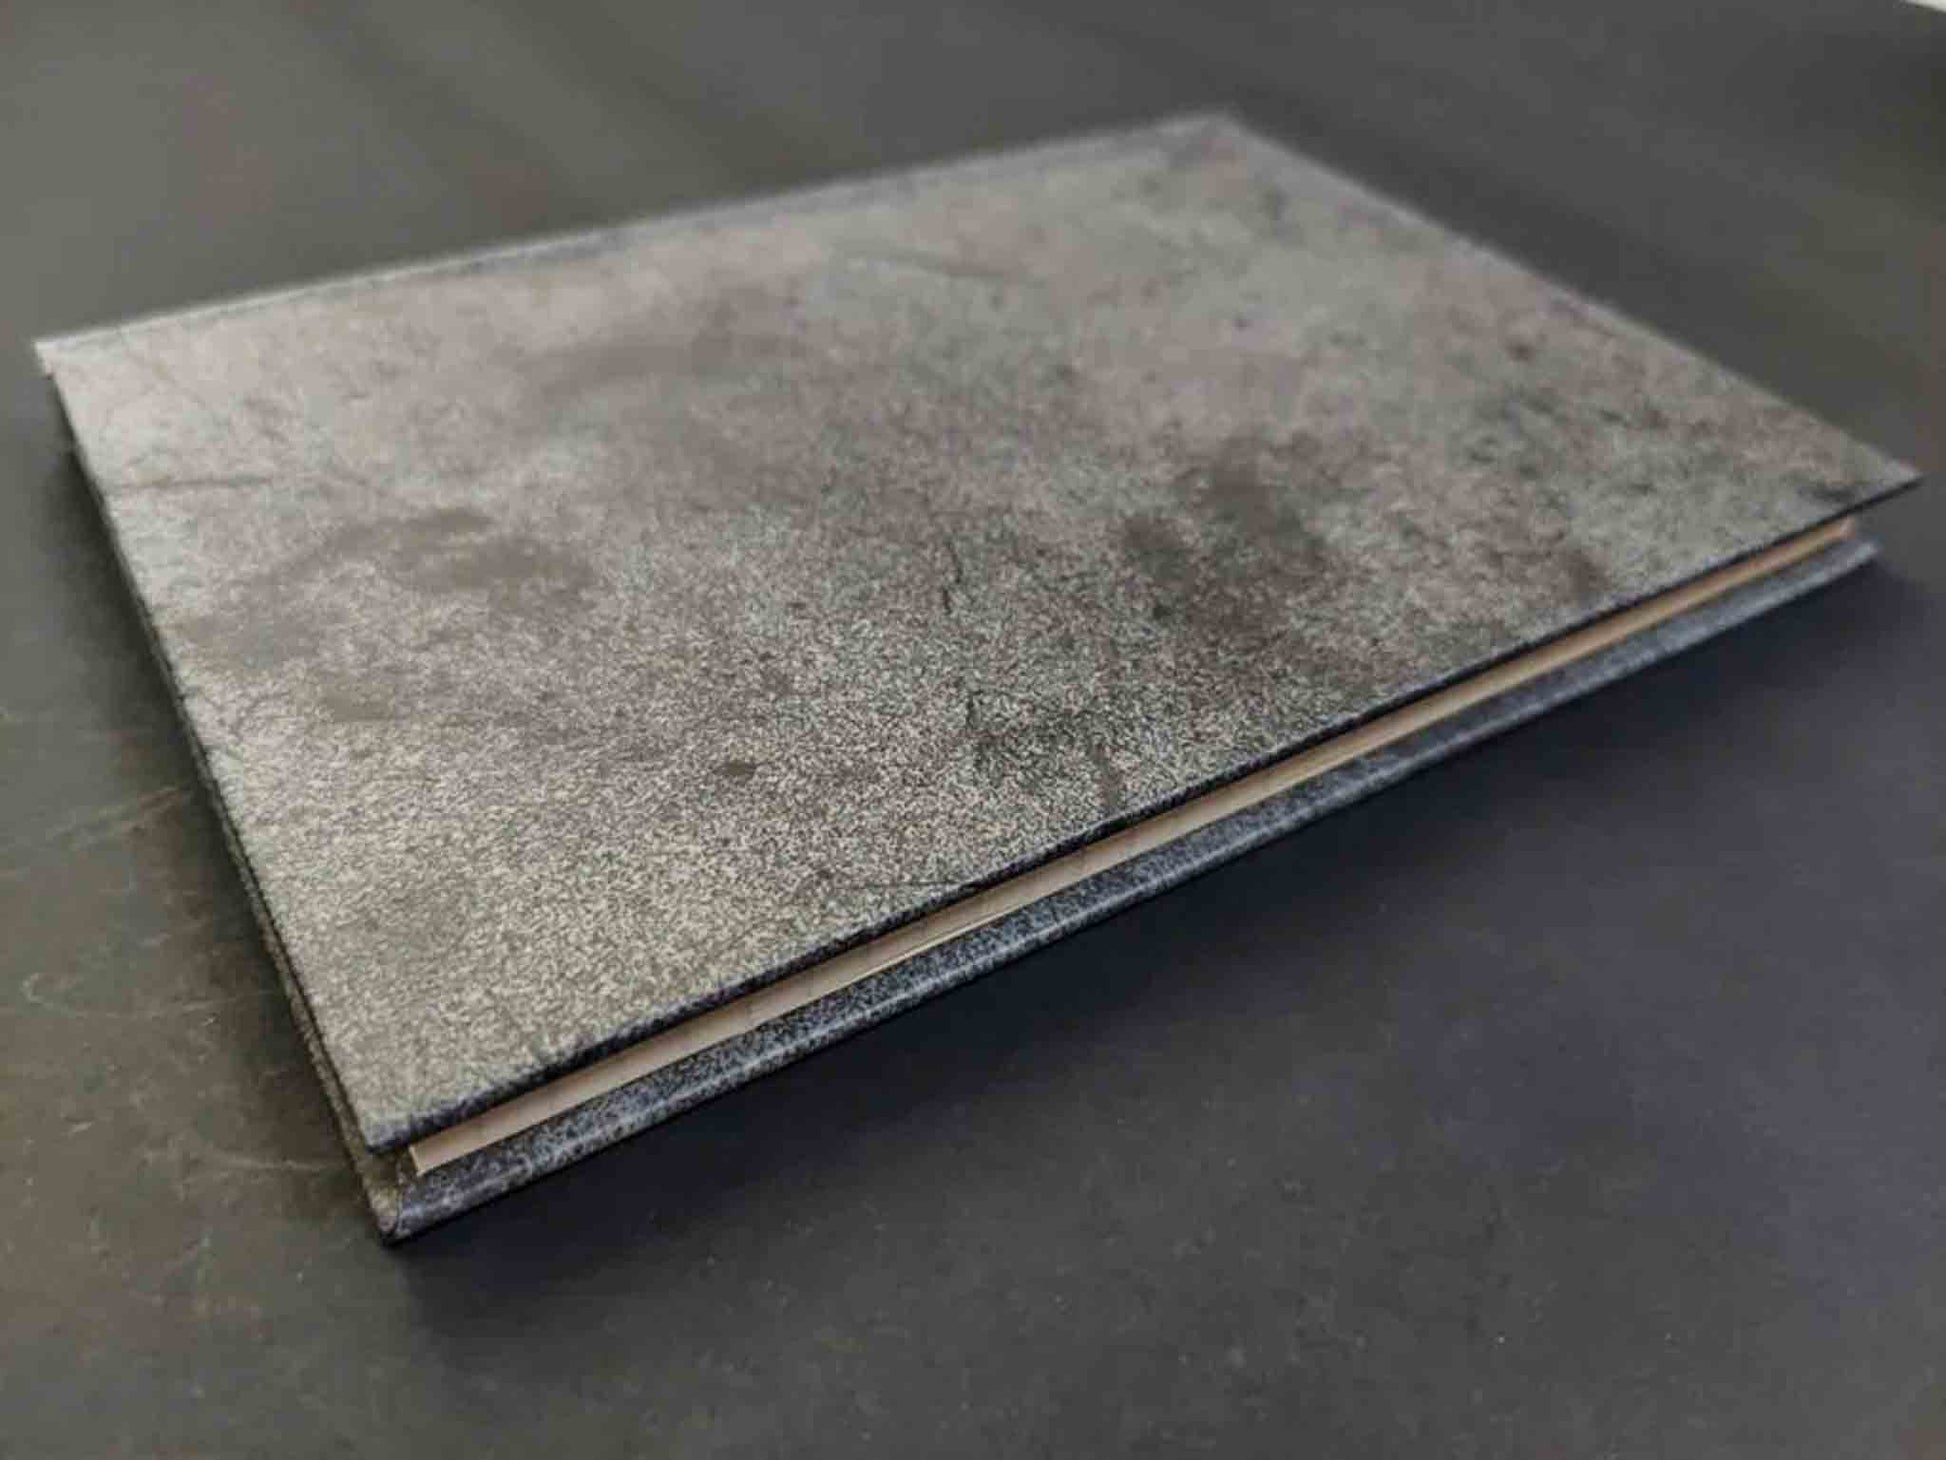 The Last of Us Ellie's Journal Replica - Available at 2Fast2See.co